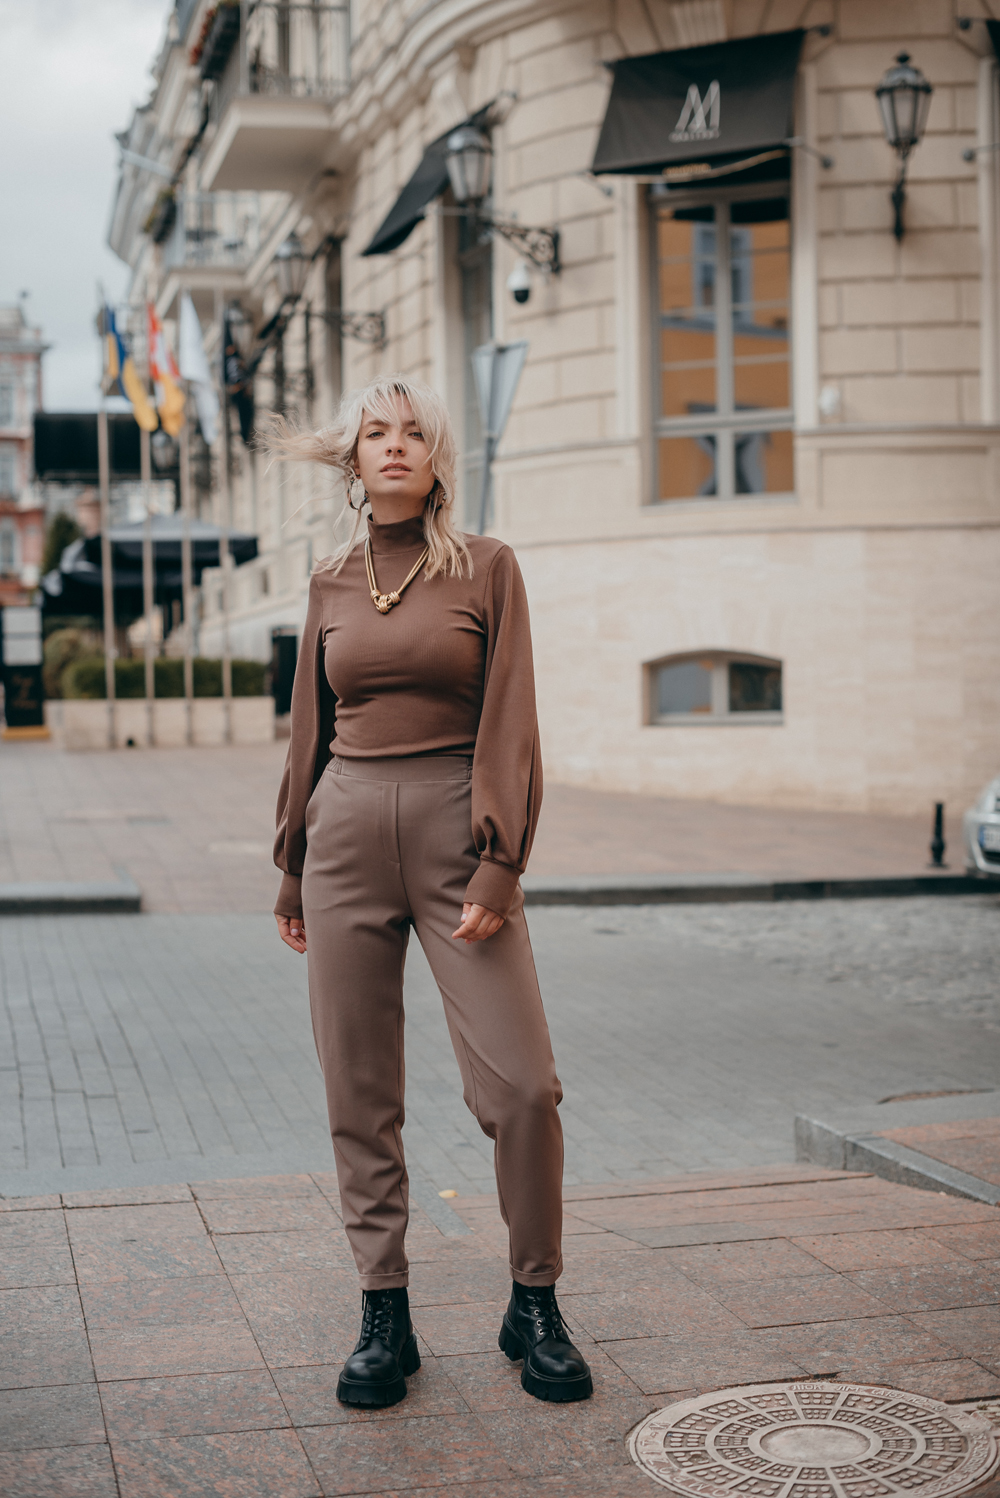 Beige elasticated trousers with cuffs